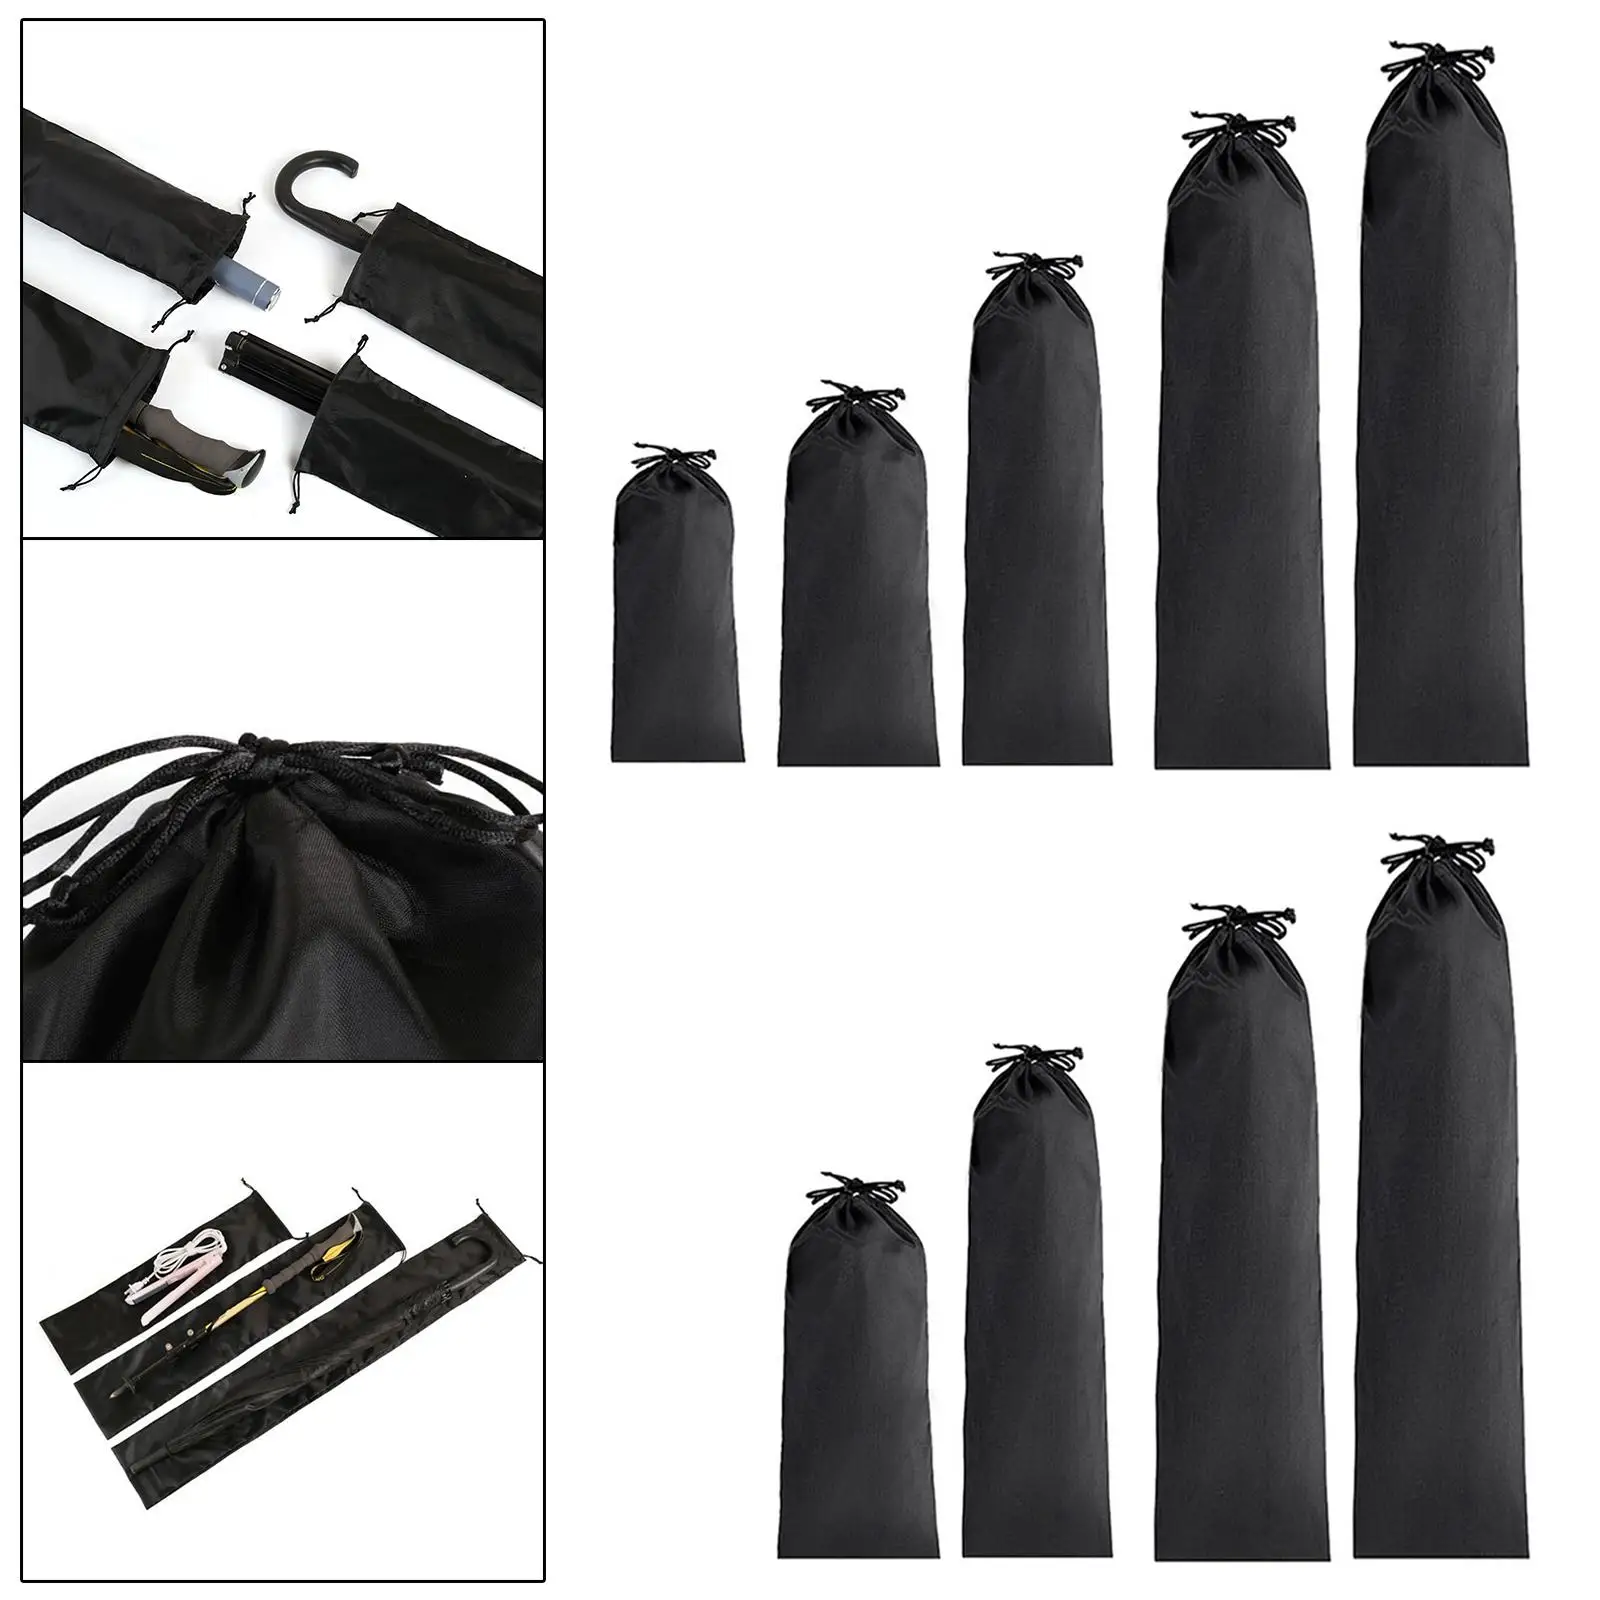 Portable Storage Bag Pouch Nylon Drawstring Bags Home Tent Poles Backpacking Umbrellas Container for Tripods Other Equipment